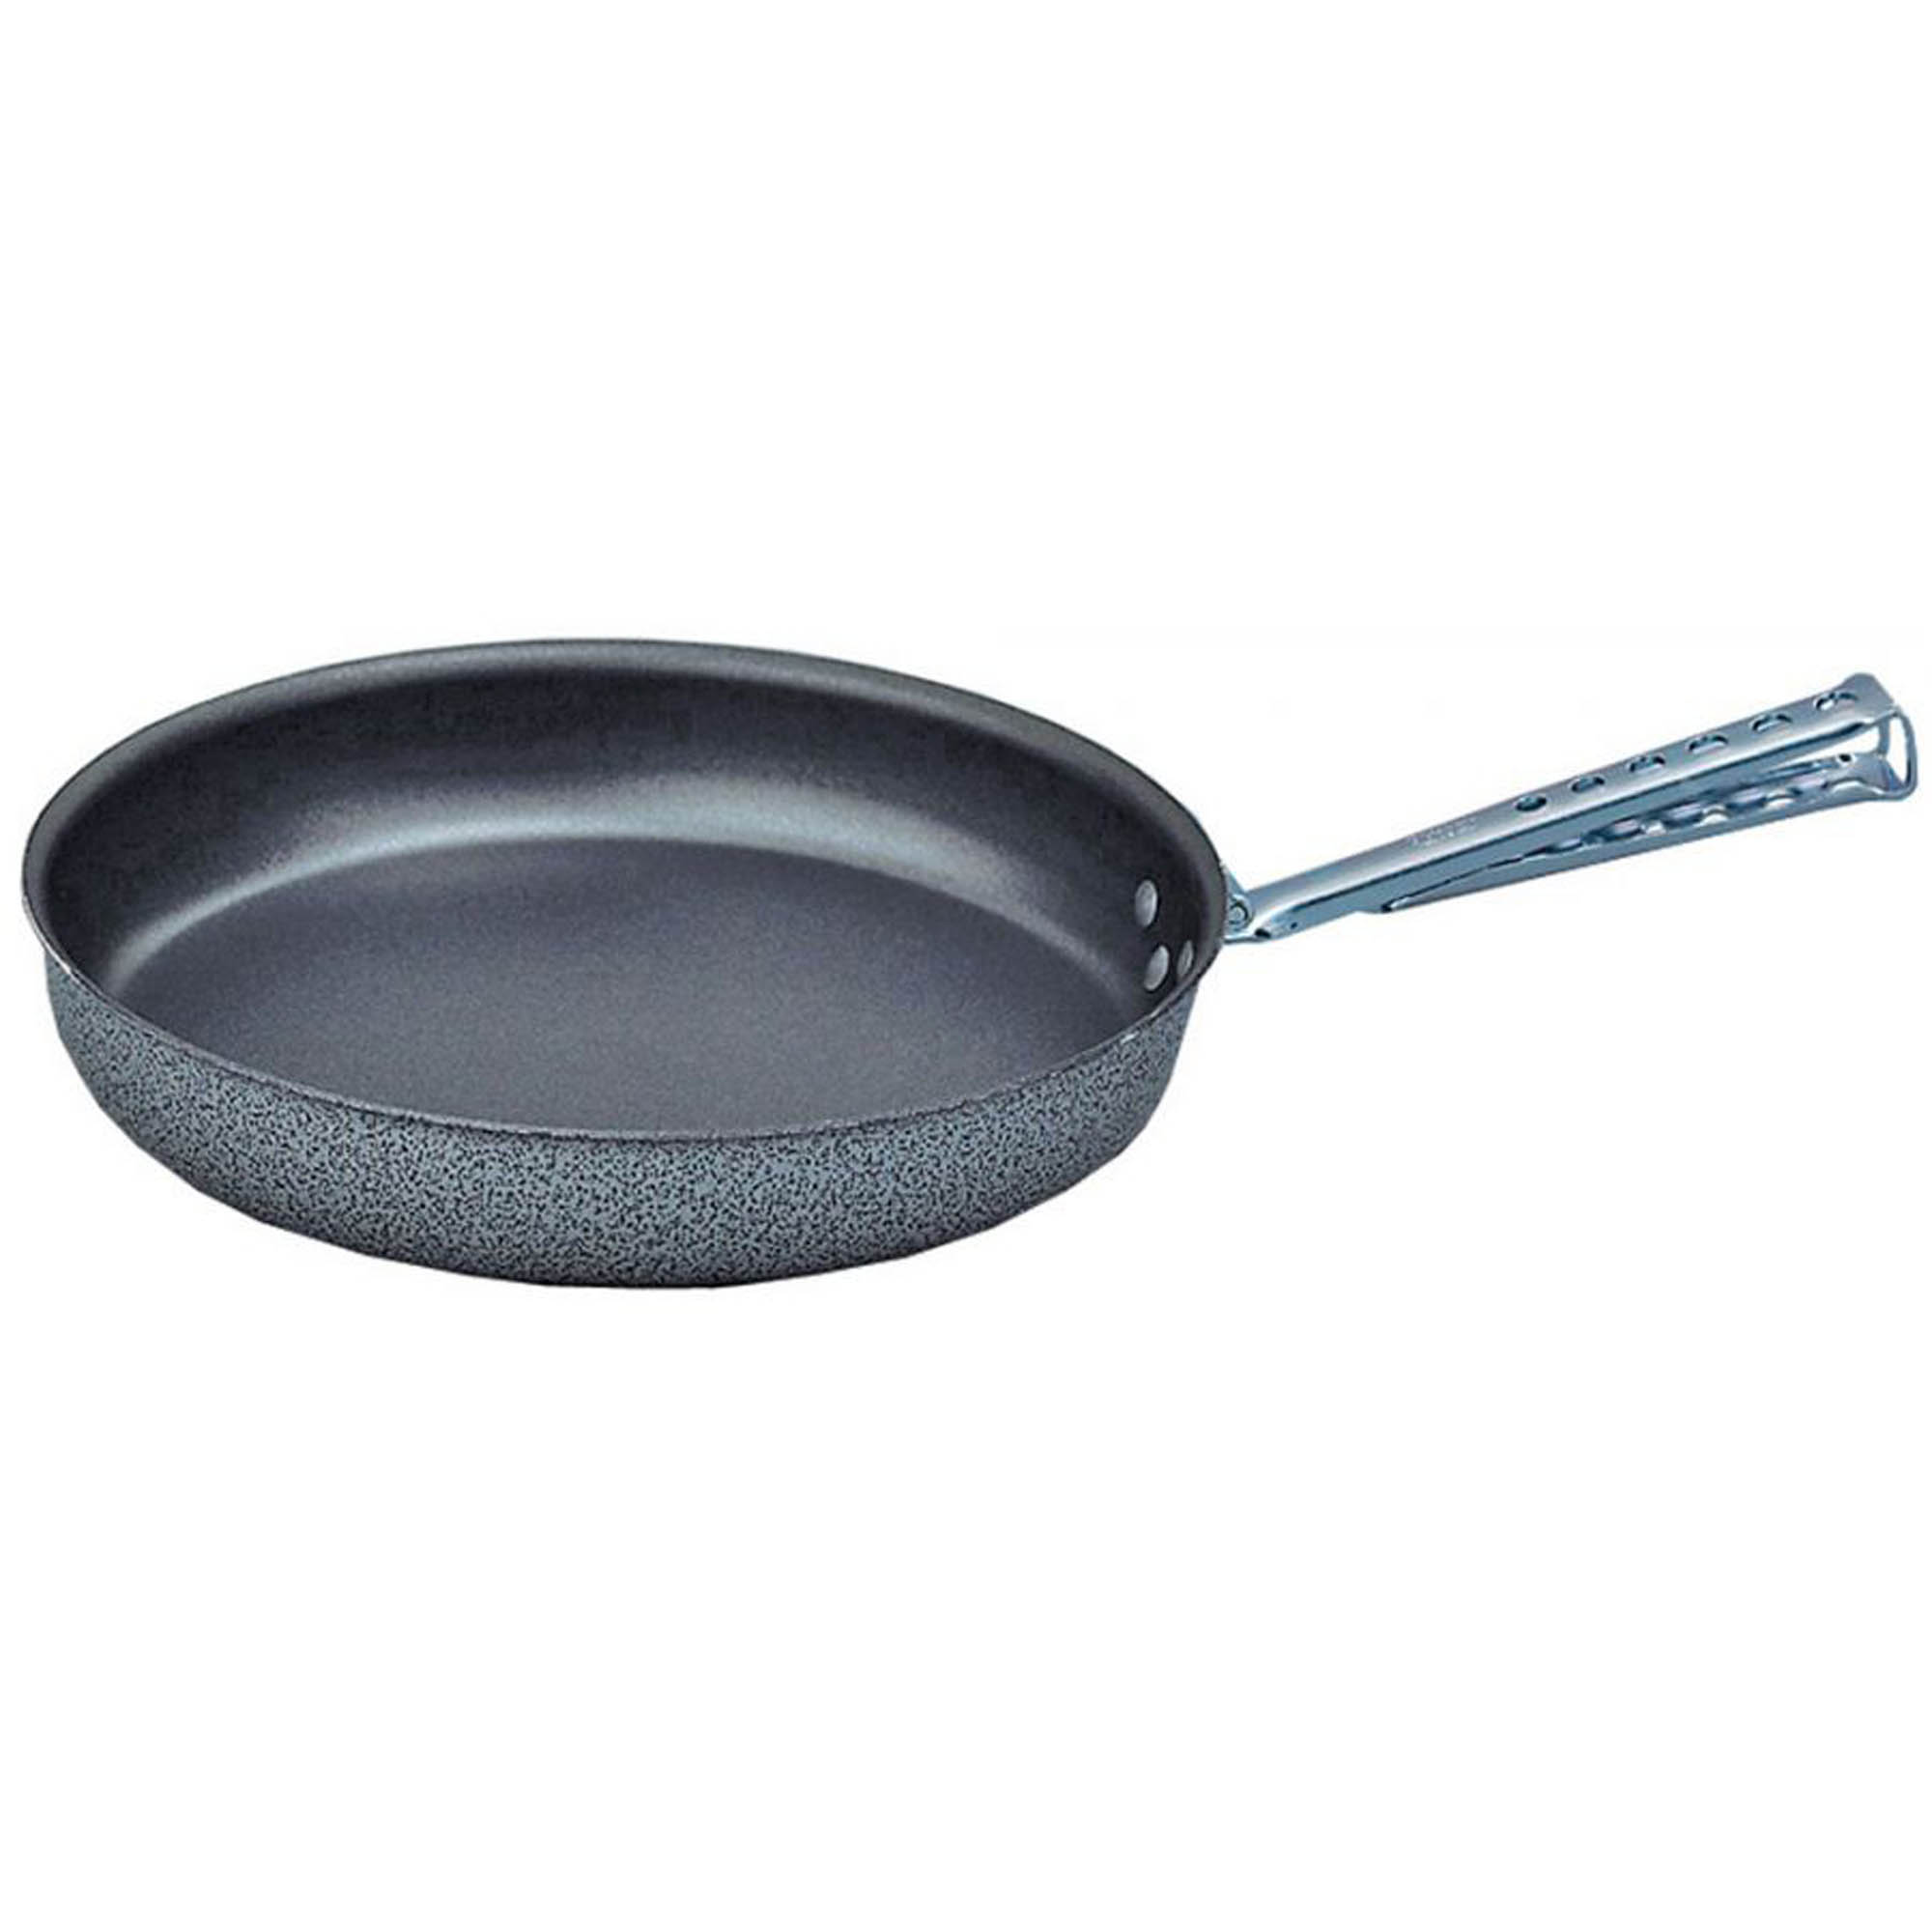 Trangia Non-Stick Frying Pan 725-22 With Folding Handle